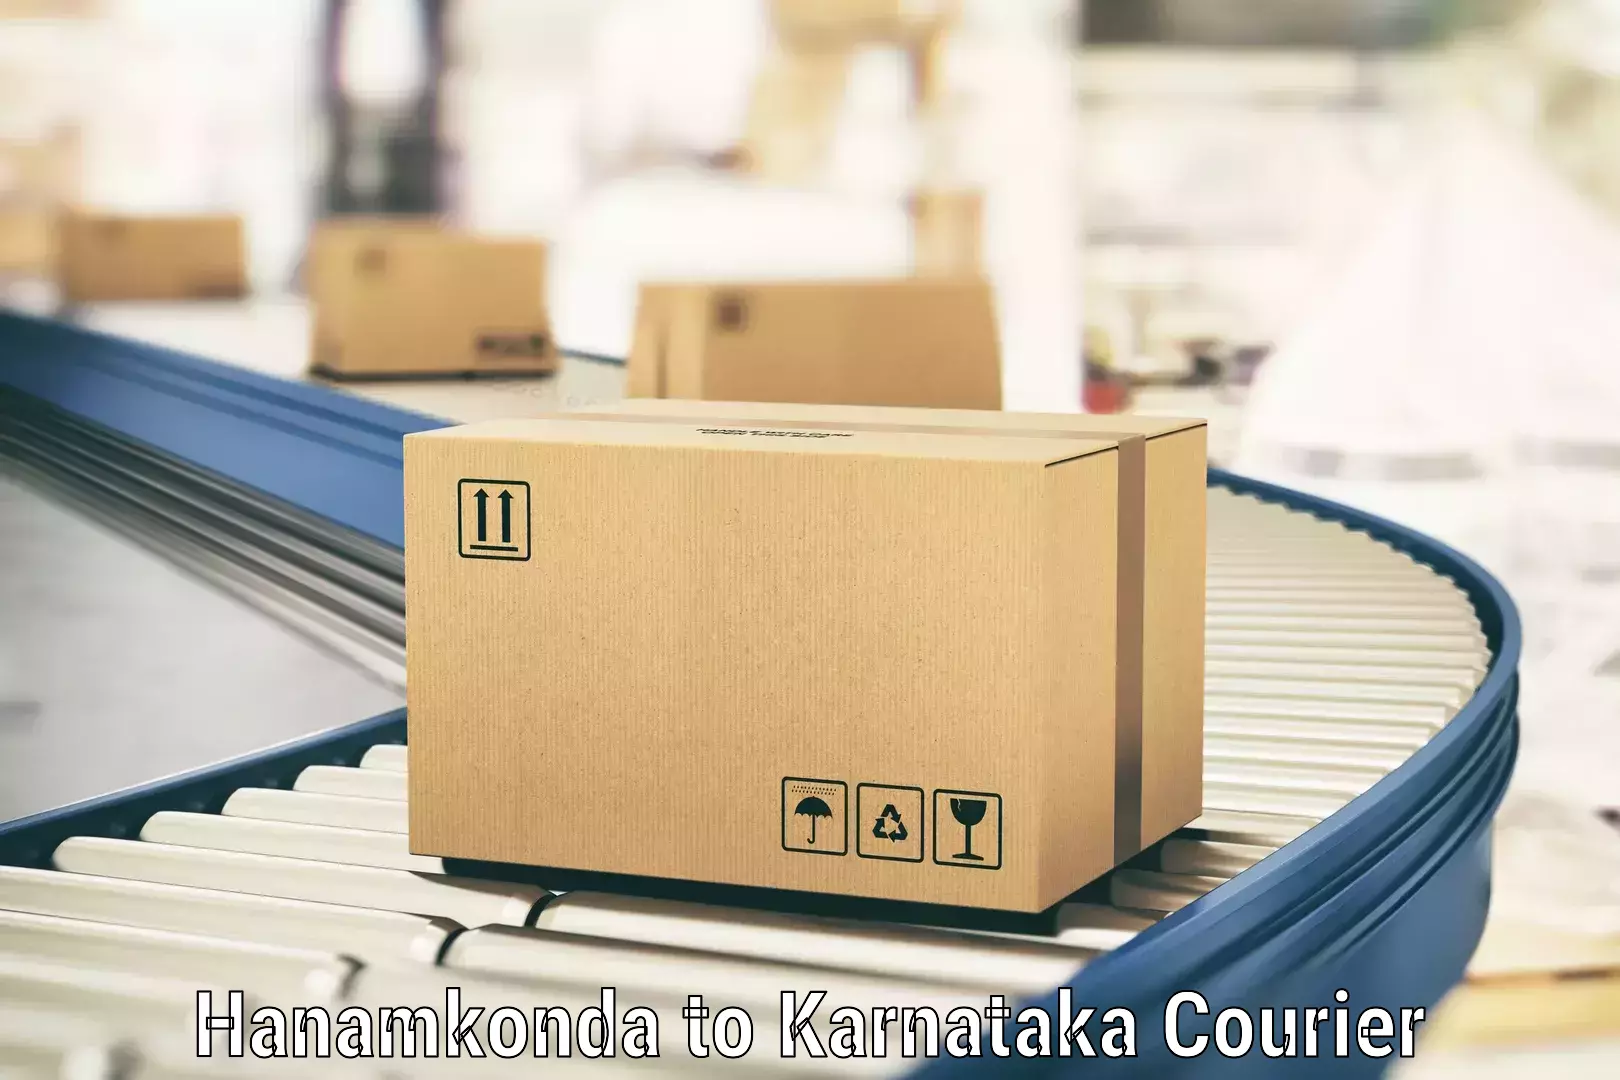 Ground shipping in Hanamkonda to Manipal Academy of Higher Education